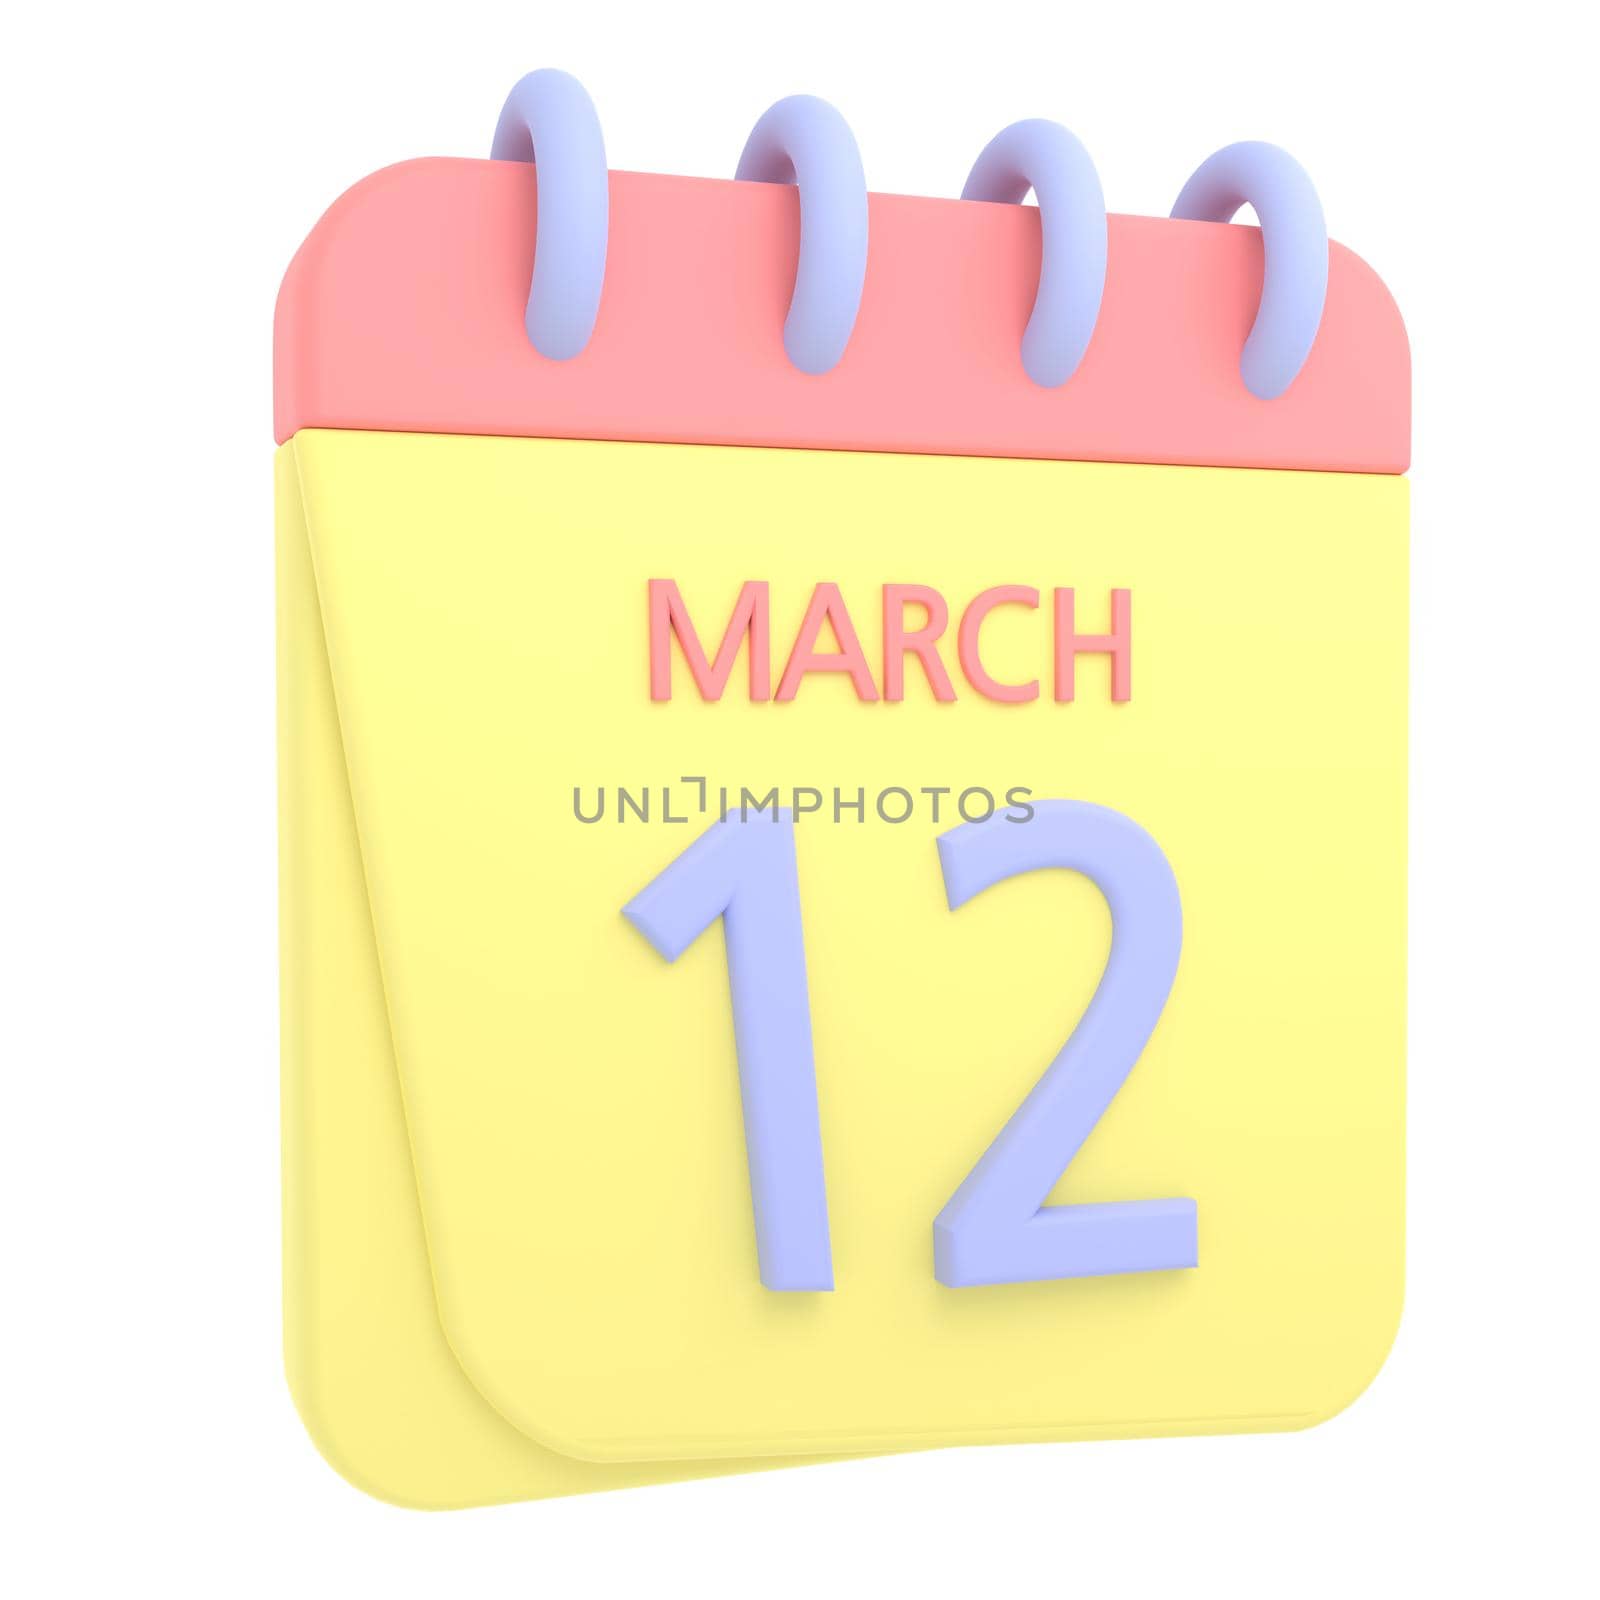 12th March 3D calendar icon. Web style. High resolution image. White background